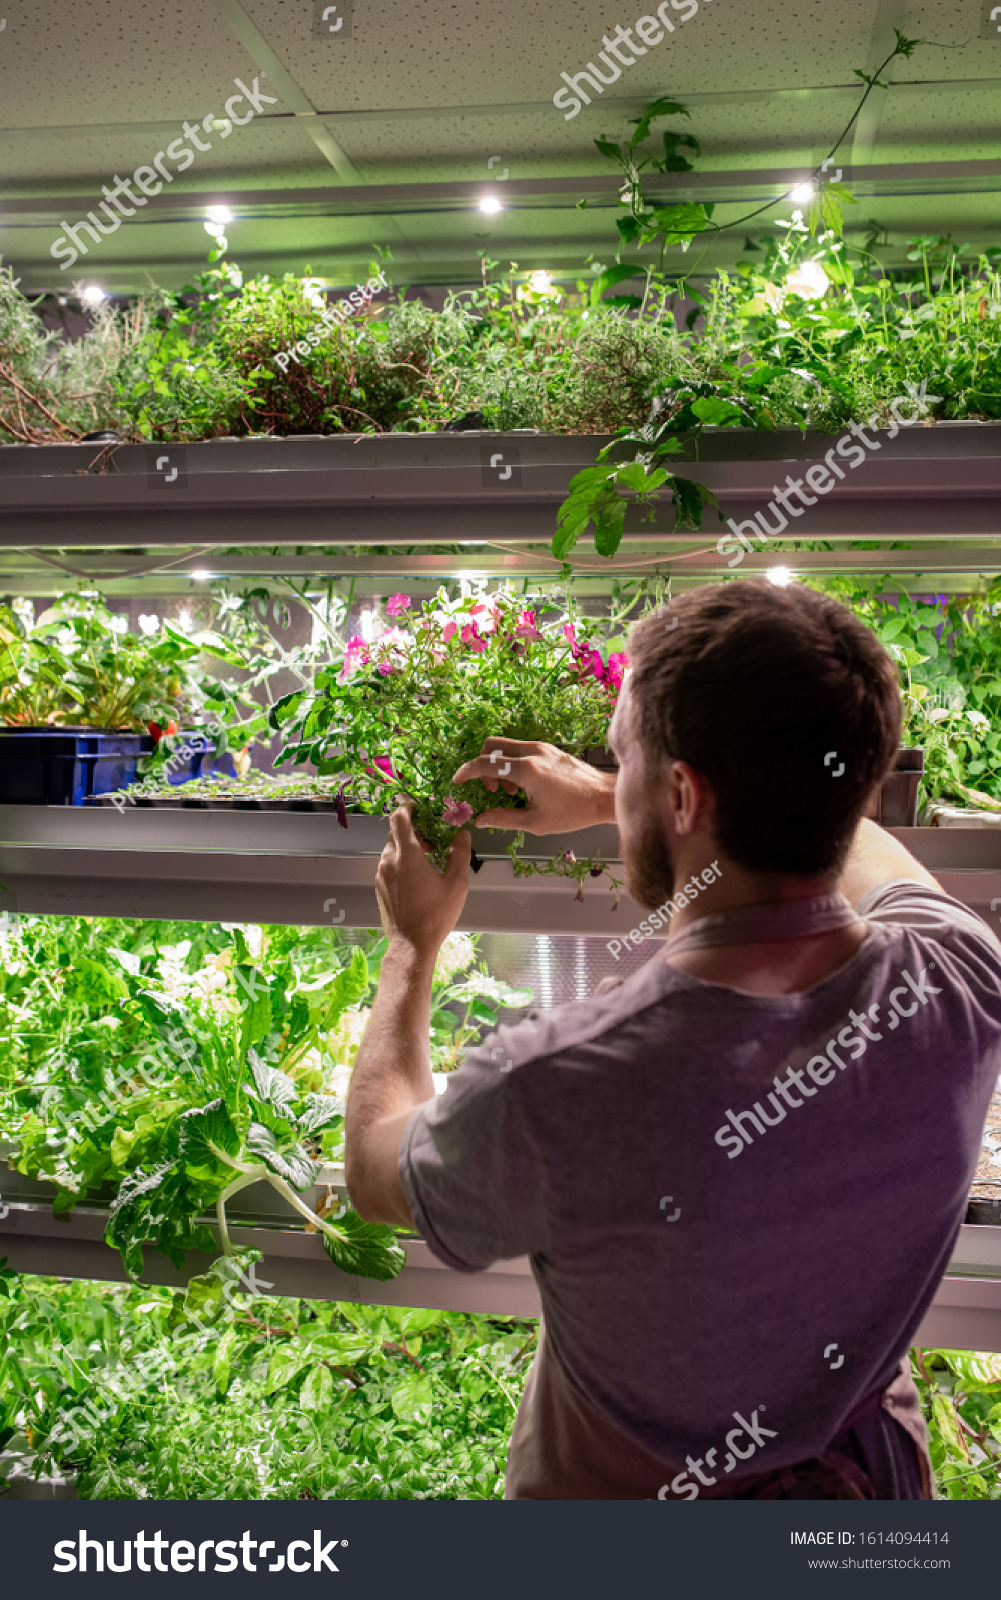 Rear view of young male farmer or selectionist in workwear taking one of growing plants on shelf during work in greenhouse #1614094414